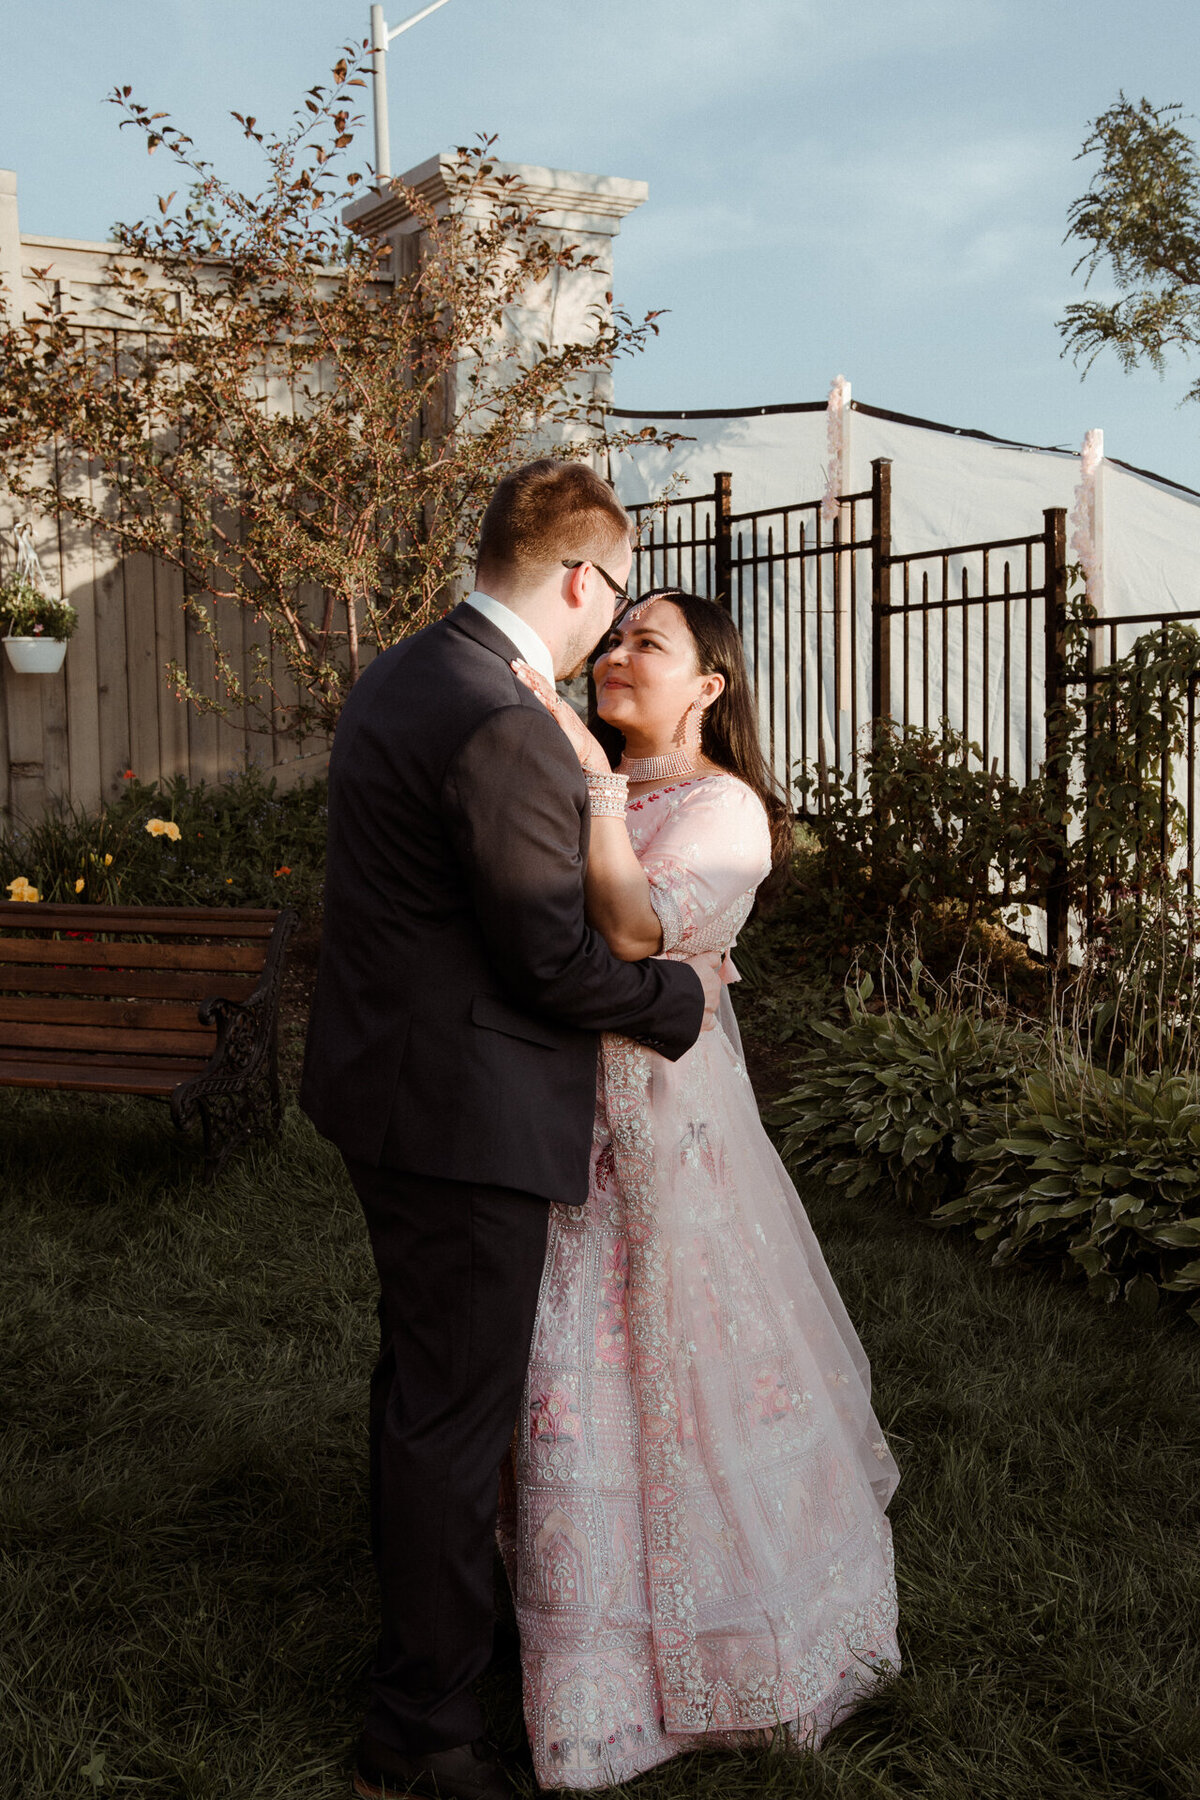 A couple in formal attire sharing an intimate moment in a garden setting.